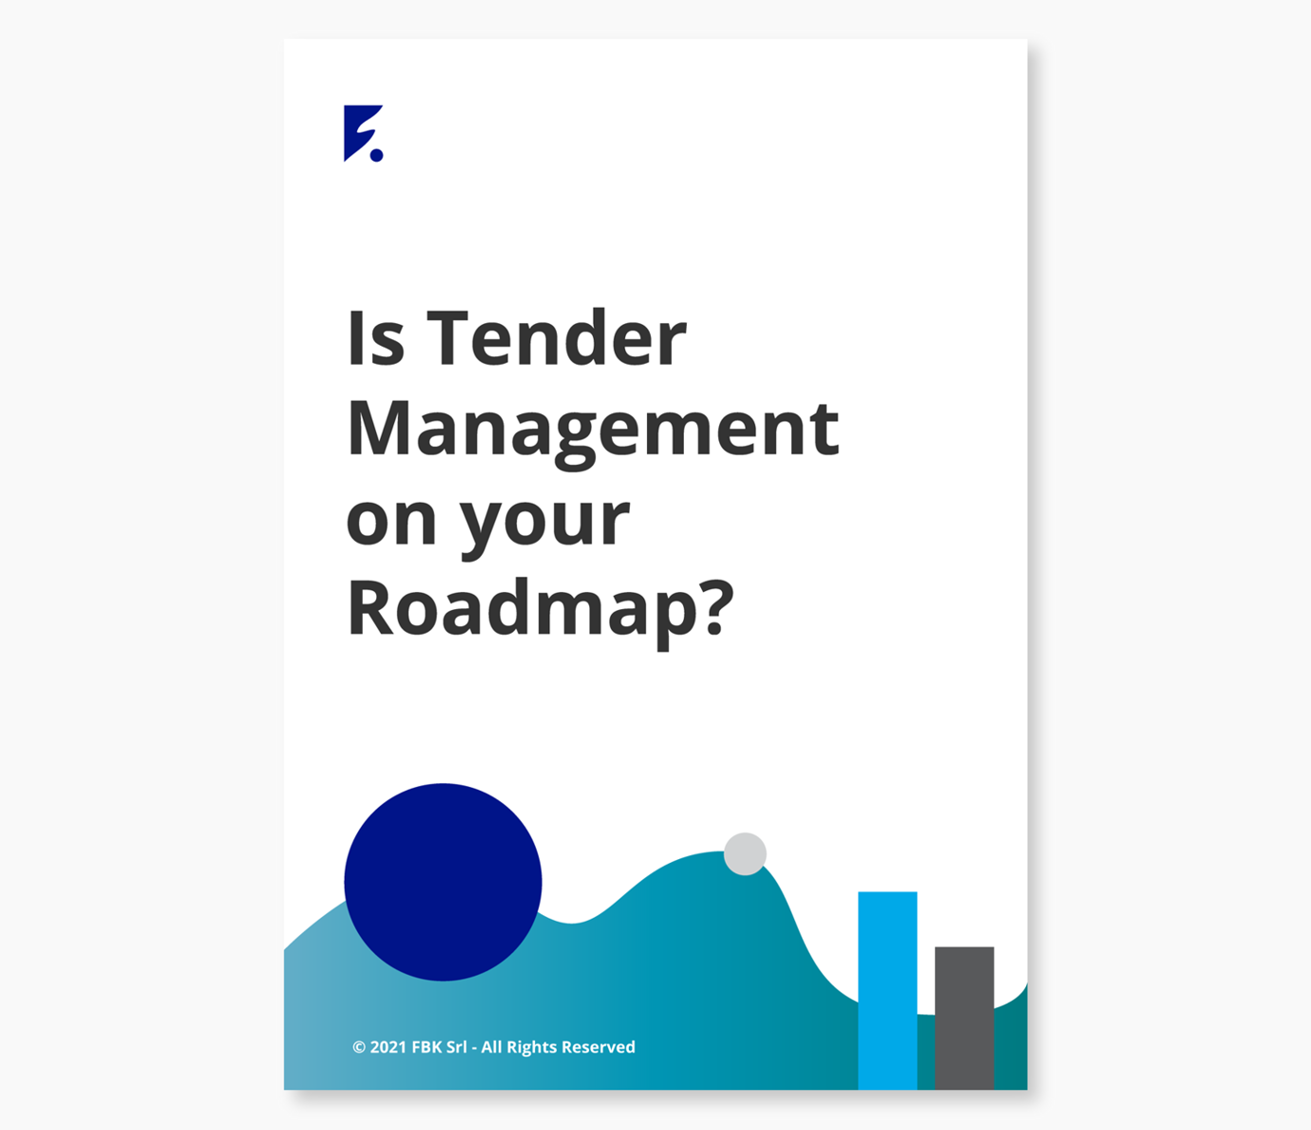 Is Tender Management on your roadmap?